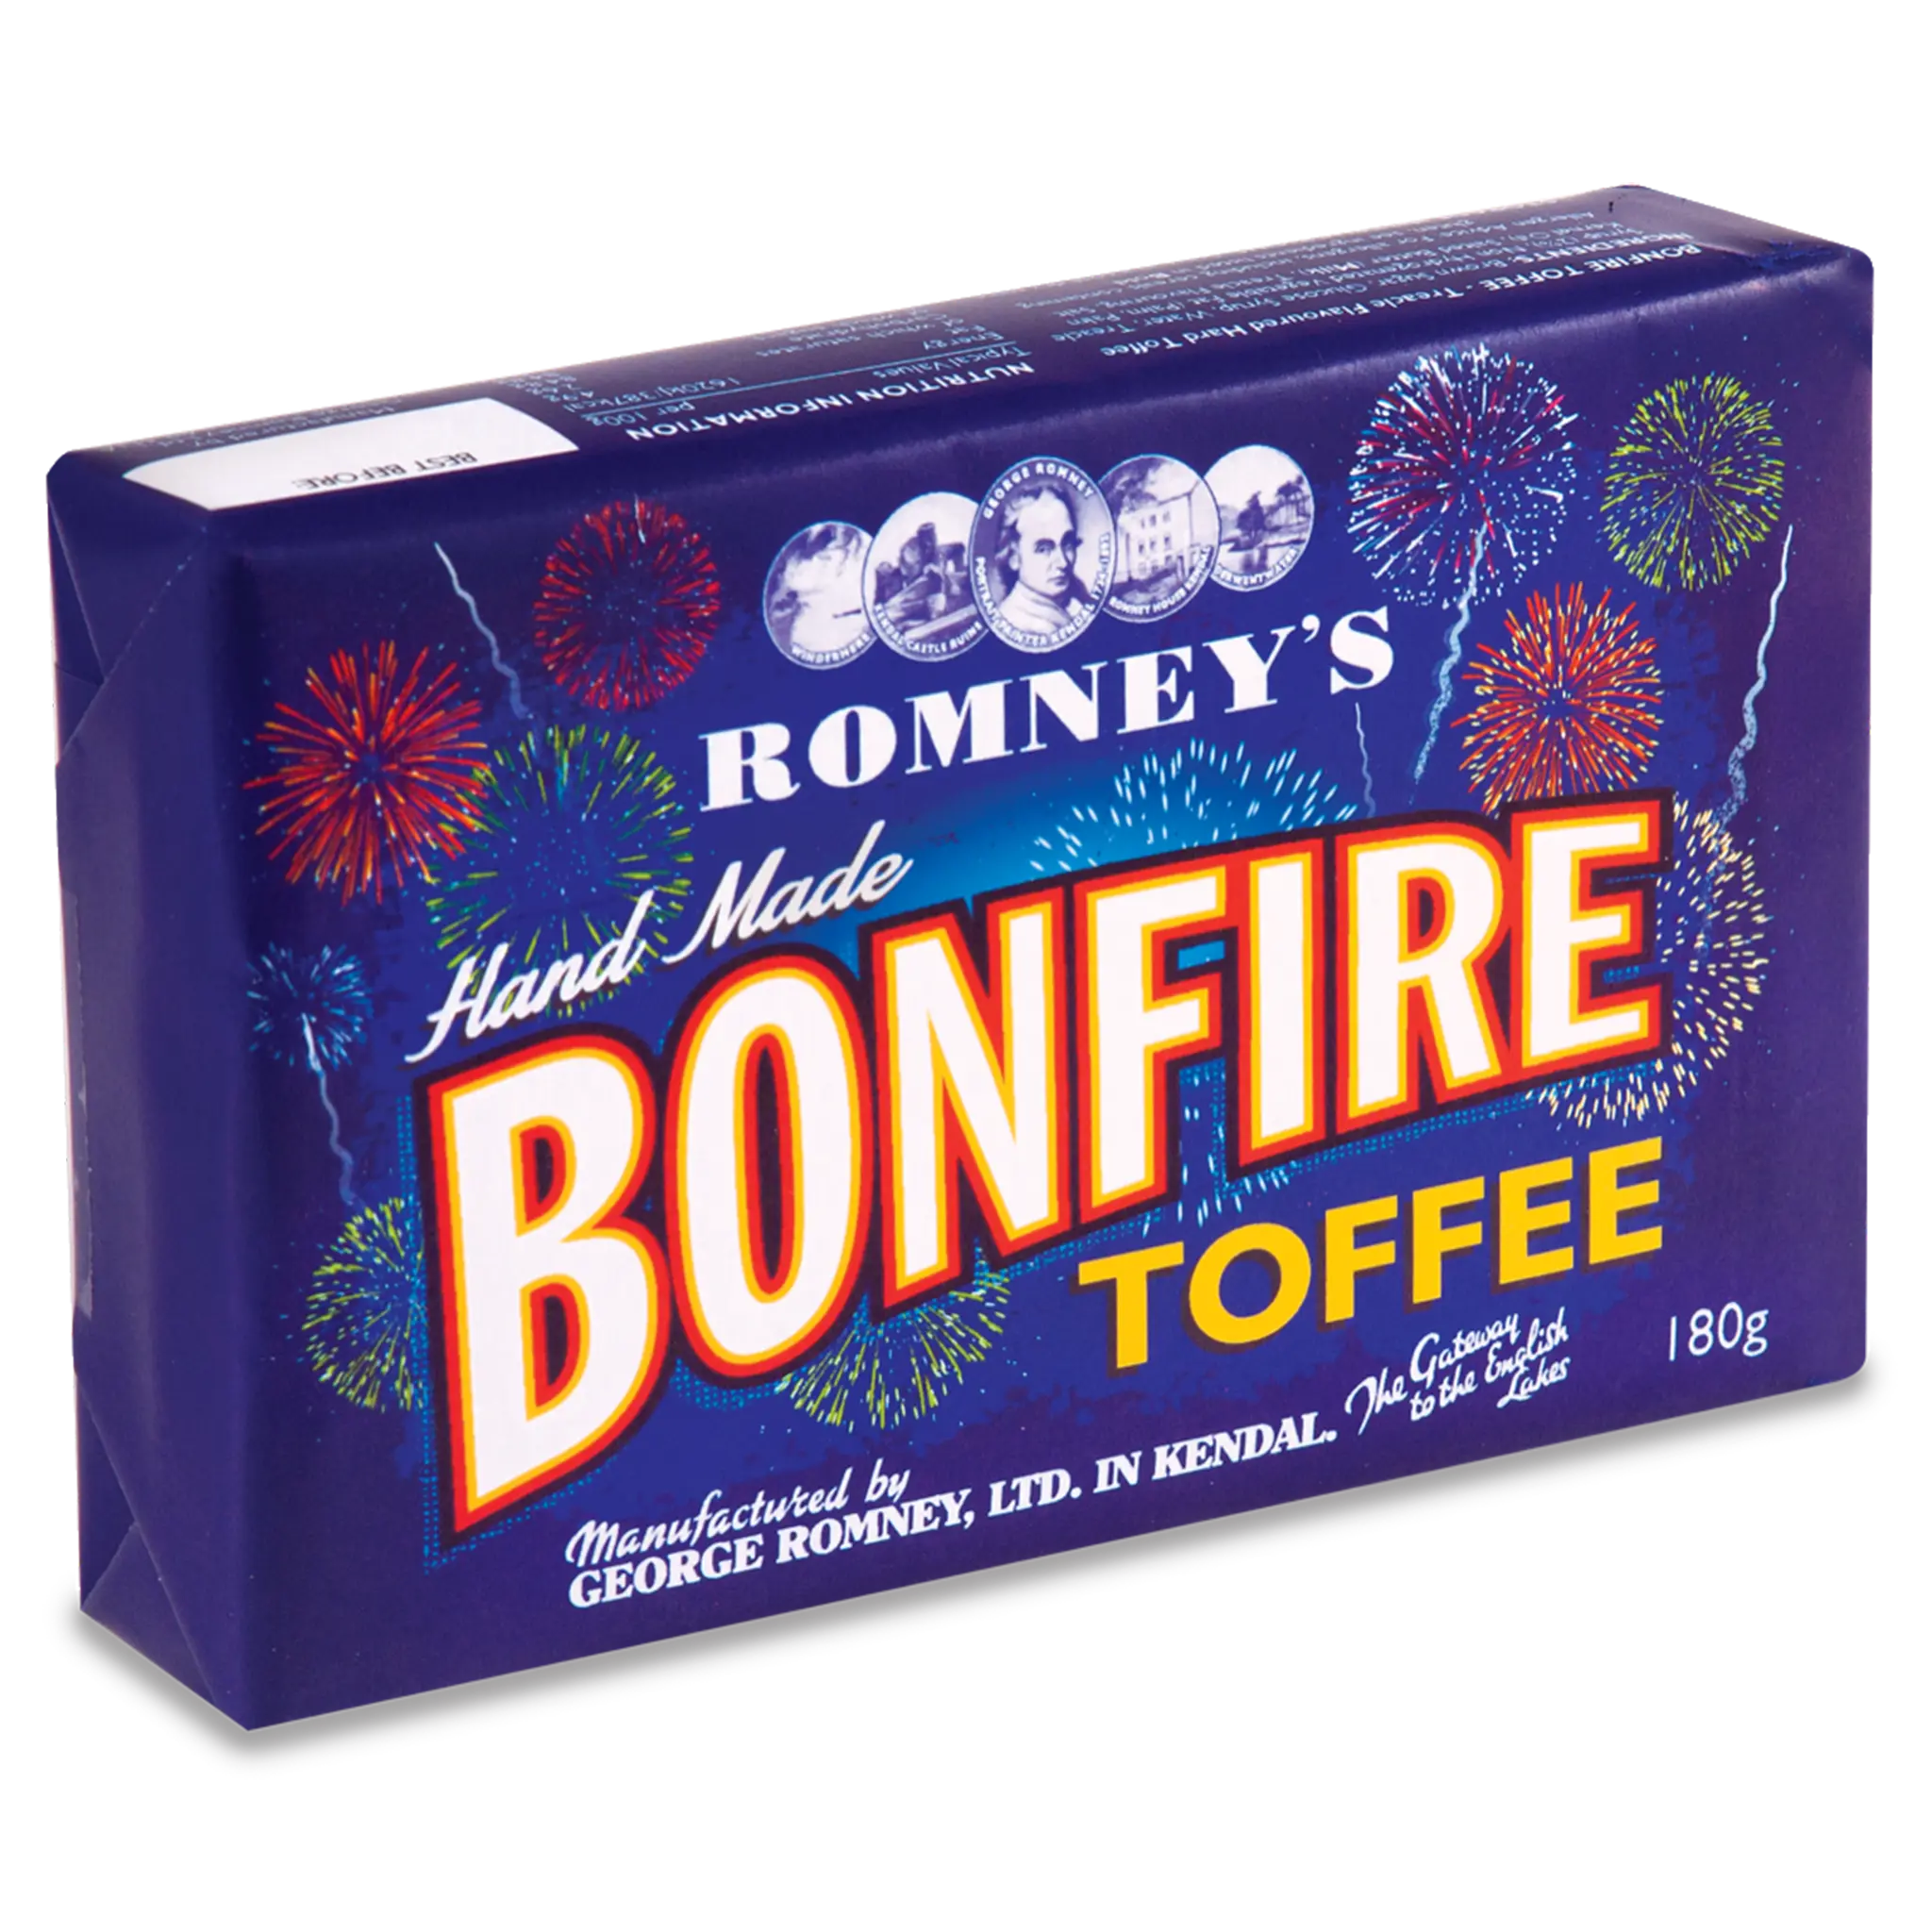 A product image of a rectangular box that is a dark blue colour. Images of colourful fireworks cover the front of the box, alongside the Romney's logo in white and the words 'Hand made Bonfire Toffee'.